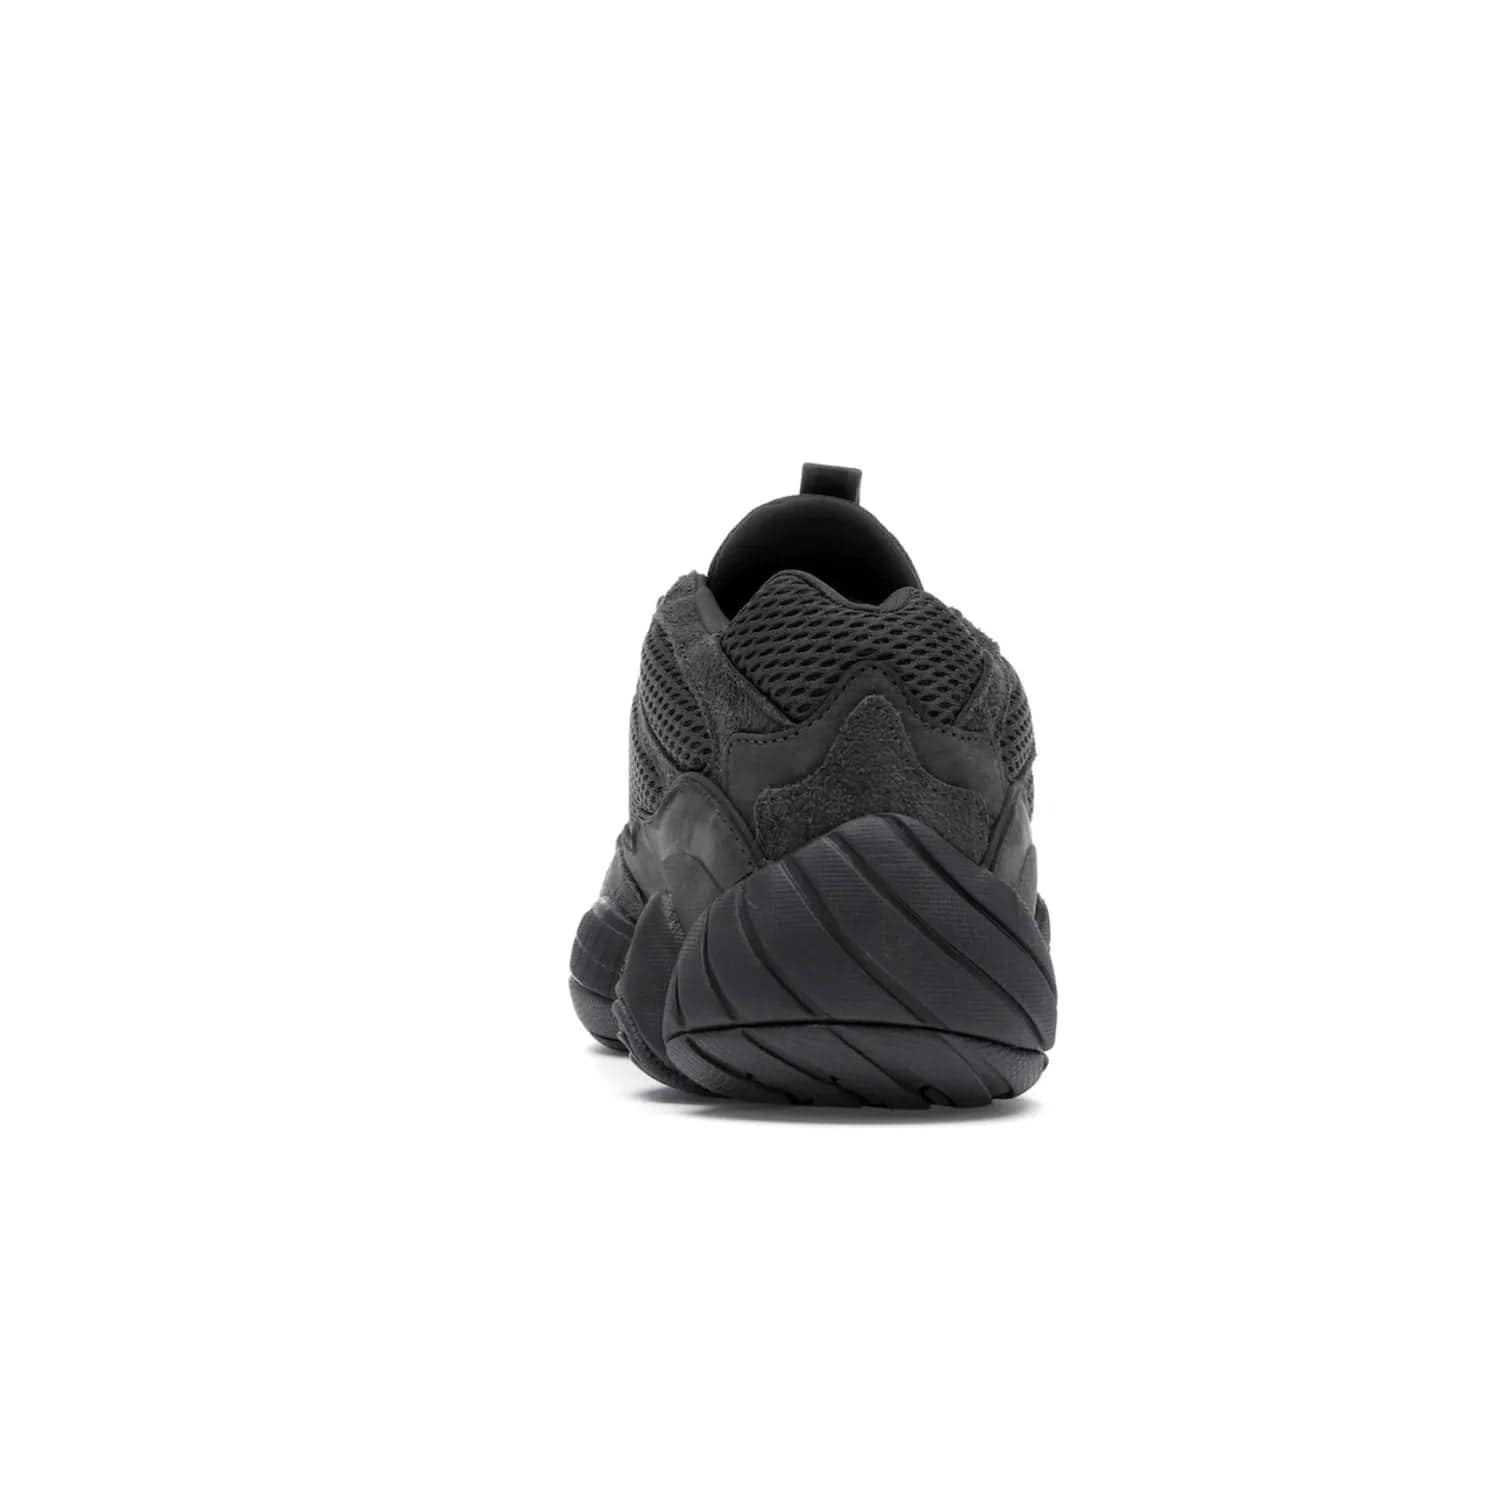 adidas Yeezy 500 Utility Black - Image 28 - Only at www.BallersClubKickz.com - Iconic adidas Yeezy 500 Utility Black in All-Black colorway. Durable black mesh and suede upper with adiPRENE® sole delivers comfort and support. Be unstoppable with the Yeezy 500 Utility Black. Released July 2018.